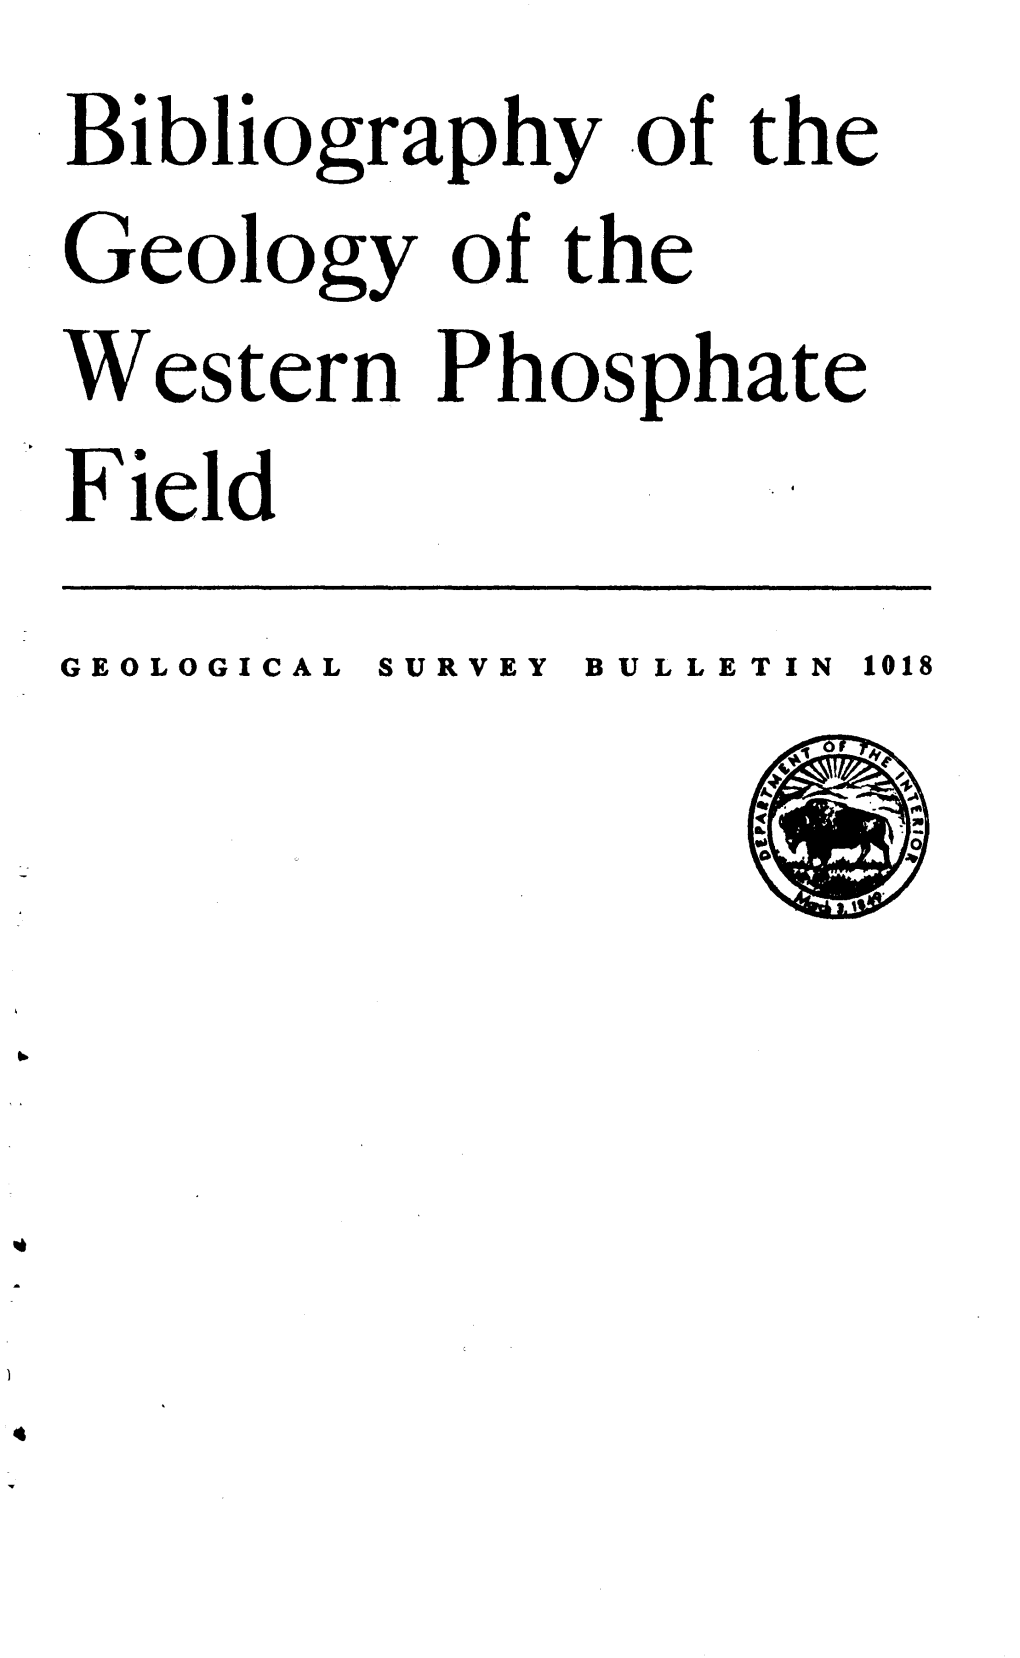 Bibliography of the Geology of the Western Phosphate Field